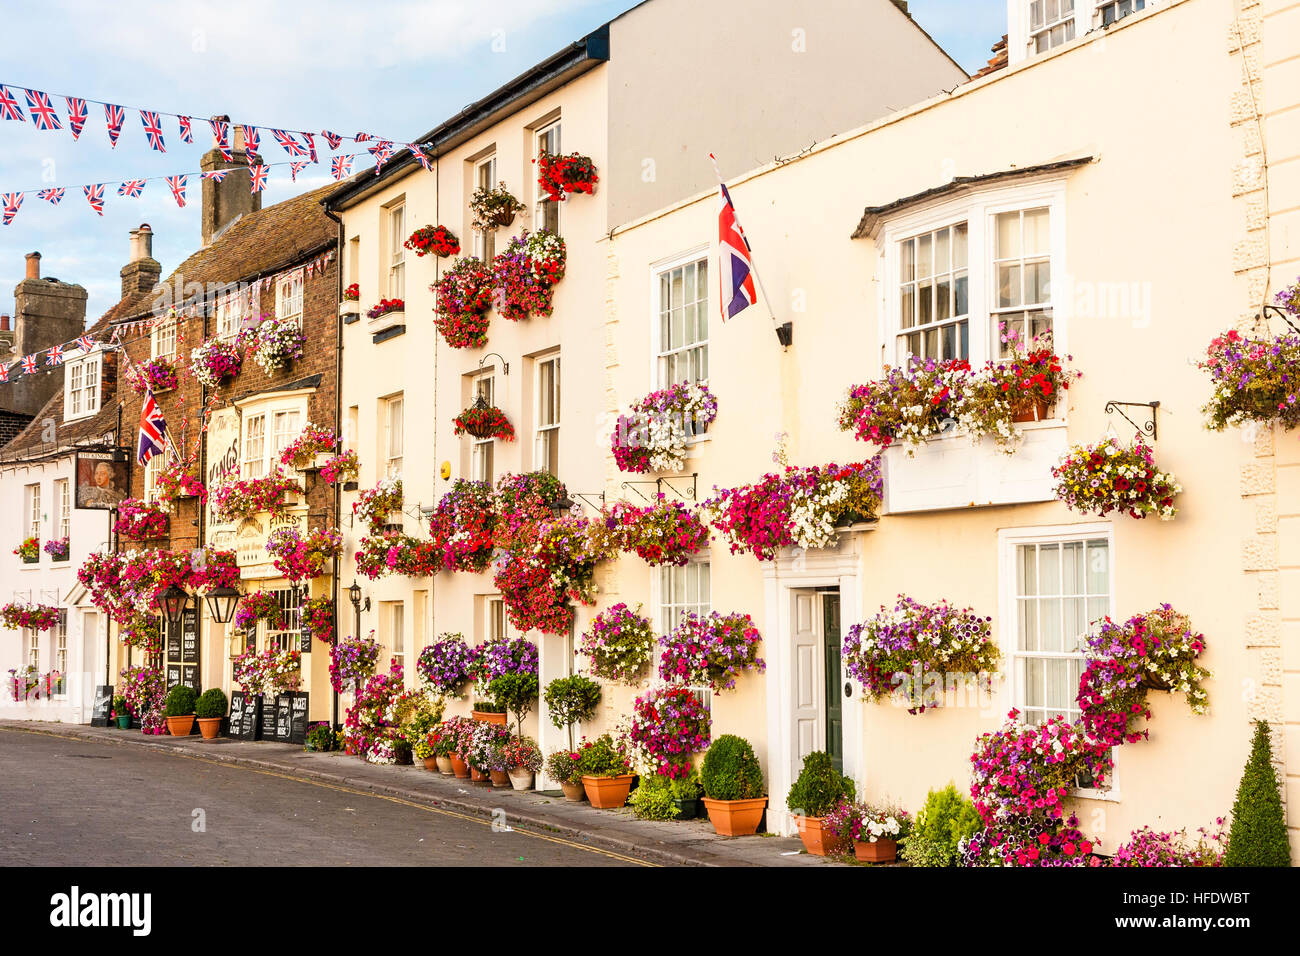 England, Deal. View along row of 17th and 18th century buildings along seafront, all decked with red flowers in boxes. Picturesque. Sunlit. Union Jack. Stock Photo